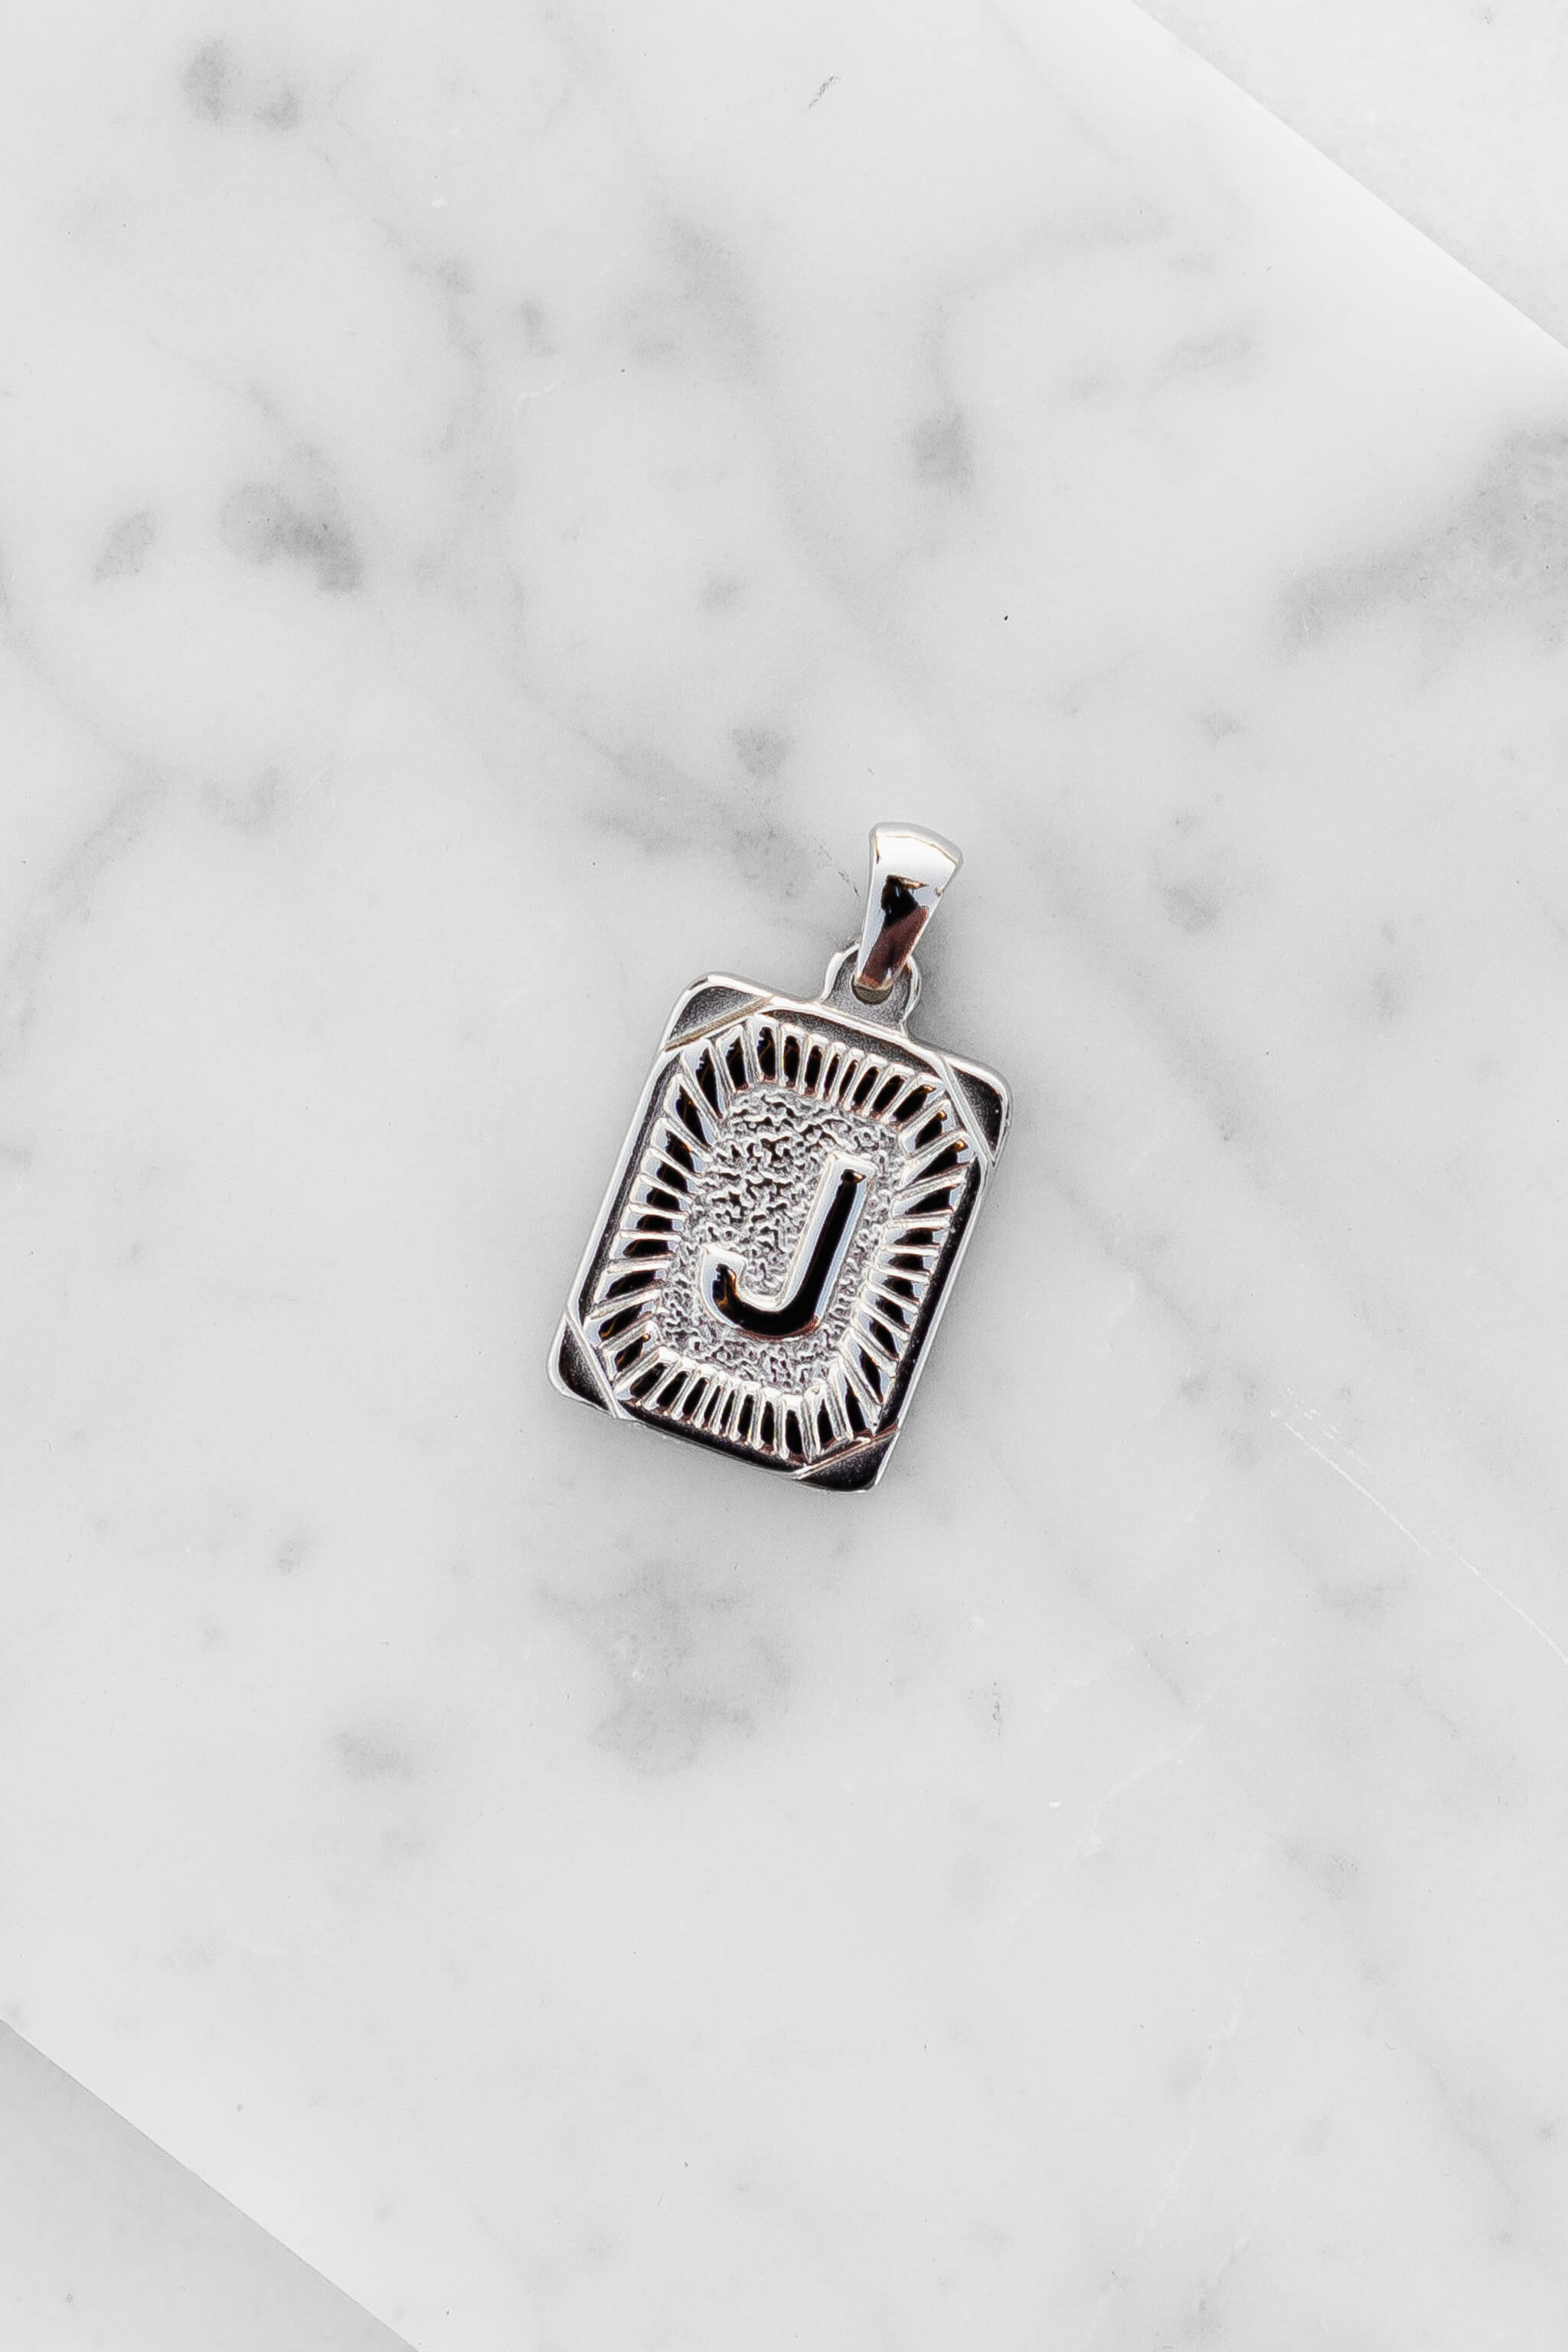 Silver Monogram Letter "J" Charm laying on a marble